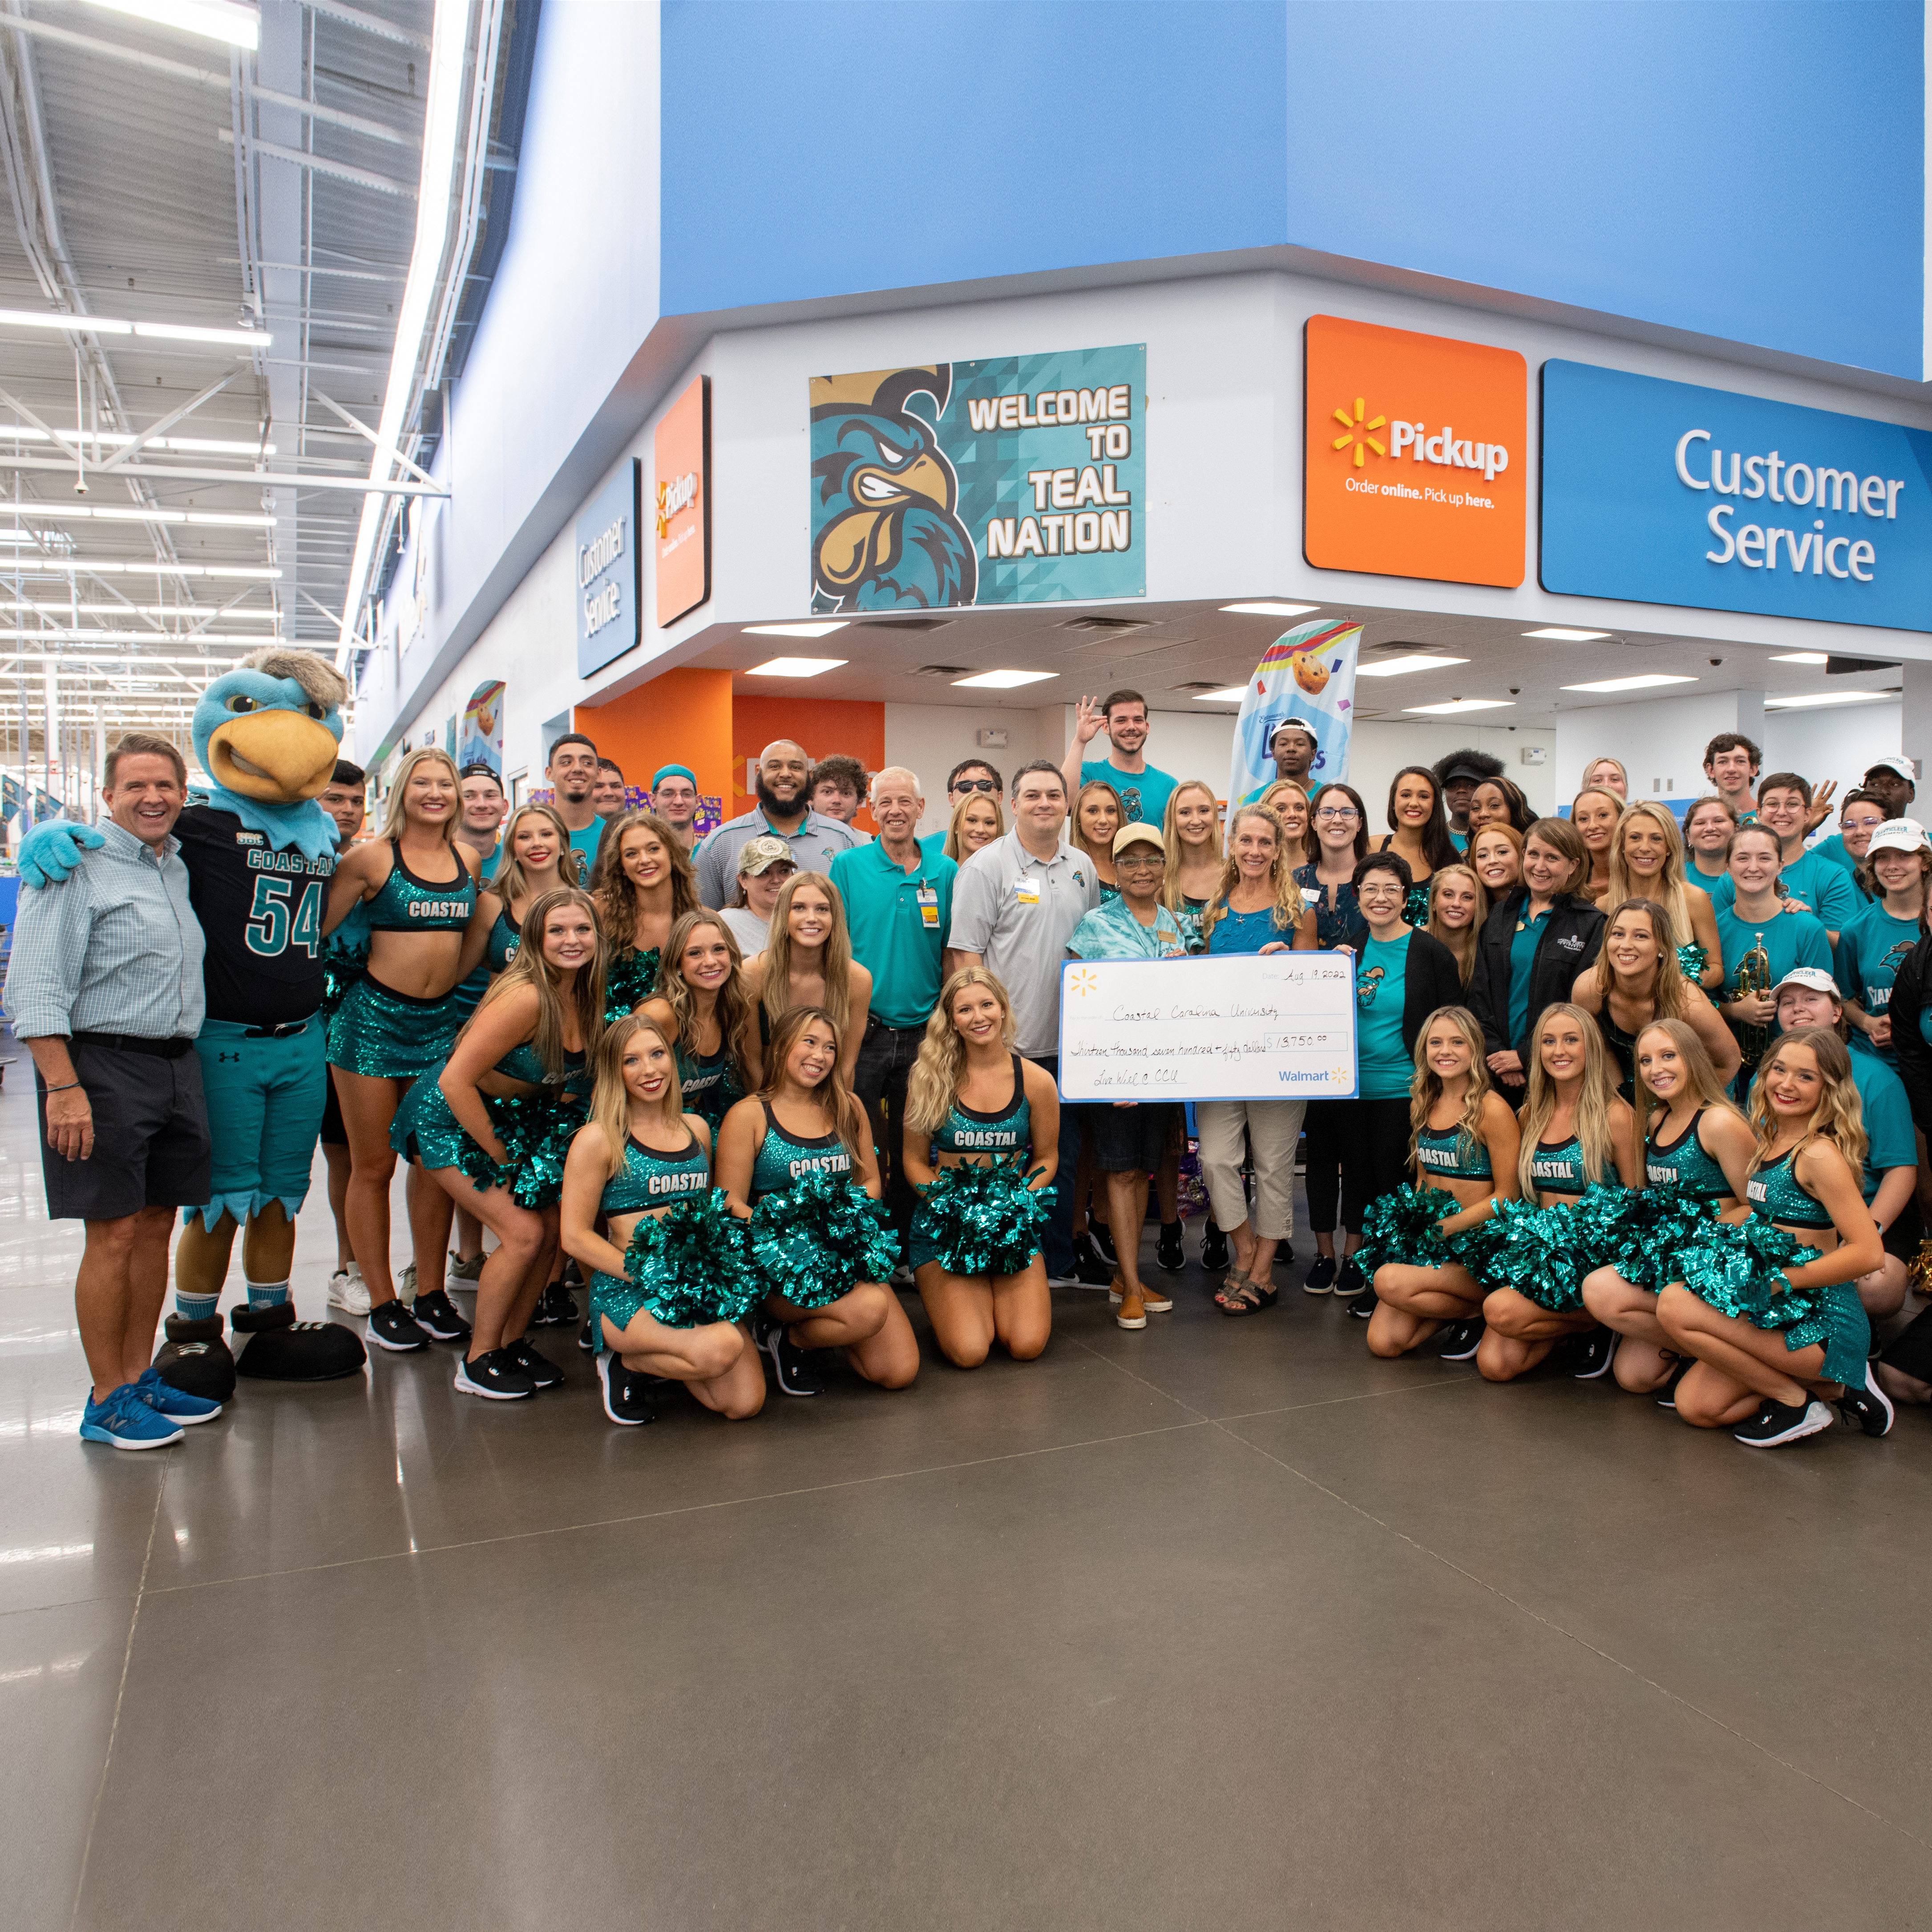 Coastal Carolina University received a $13,750 donation from Myrtle Beach area Walmart stores during its annual back to school pep rally event at Walmart on Myrtle Ridge Drive in Conway.